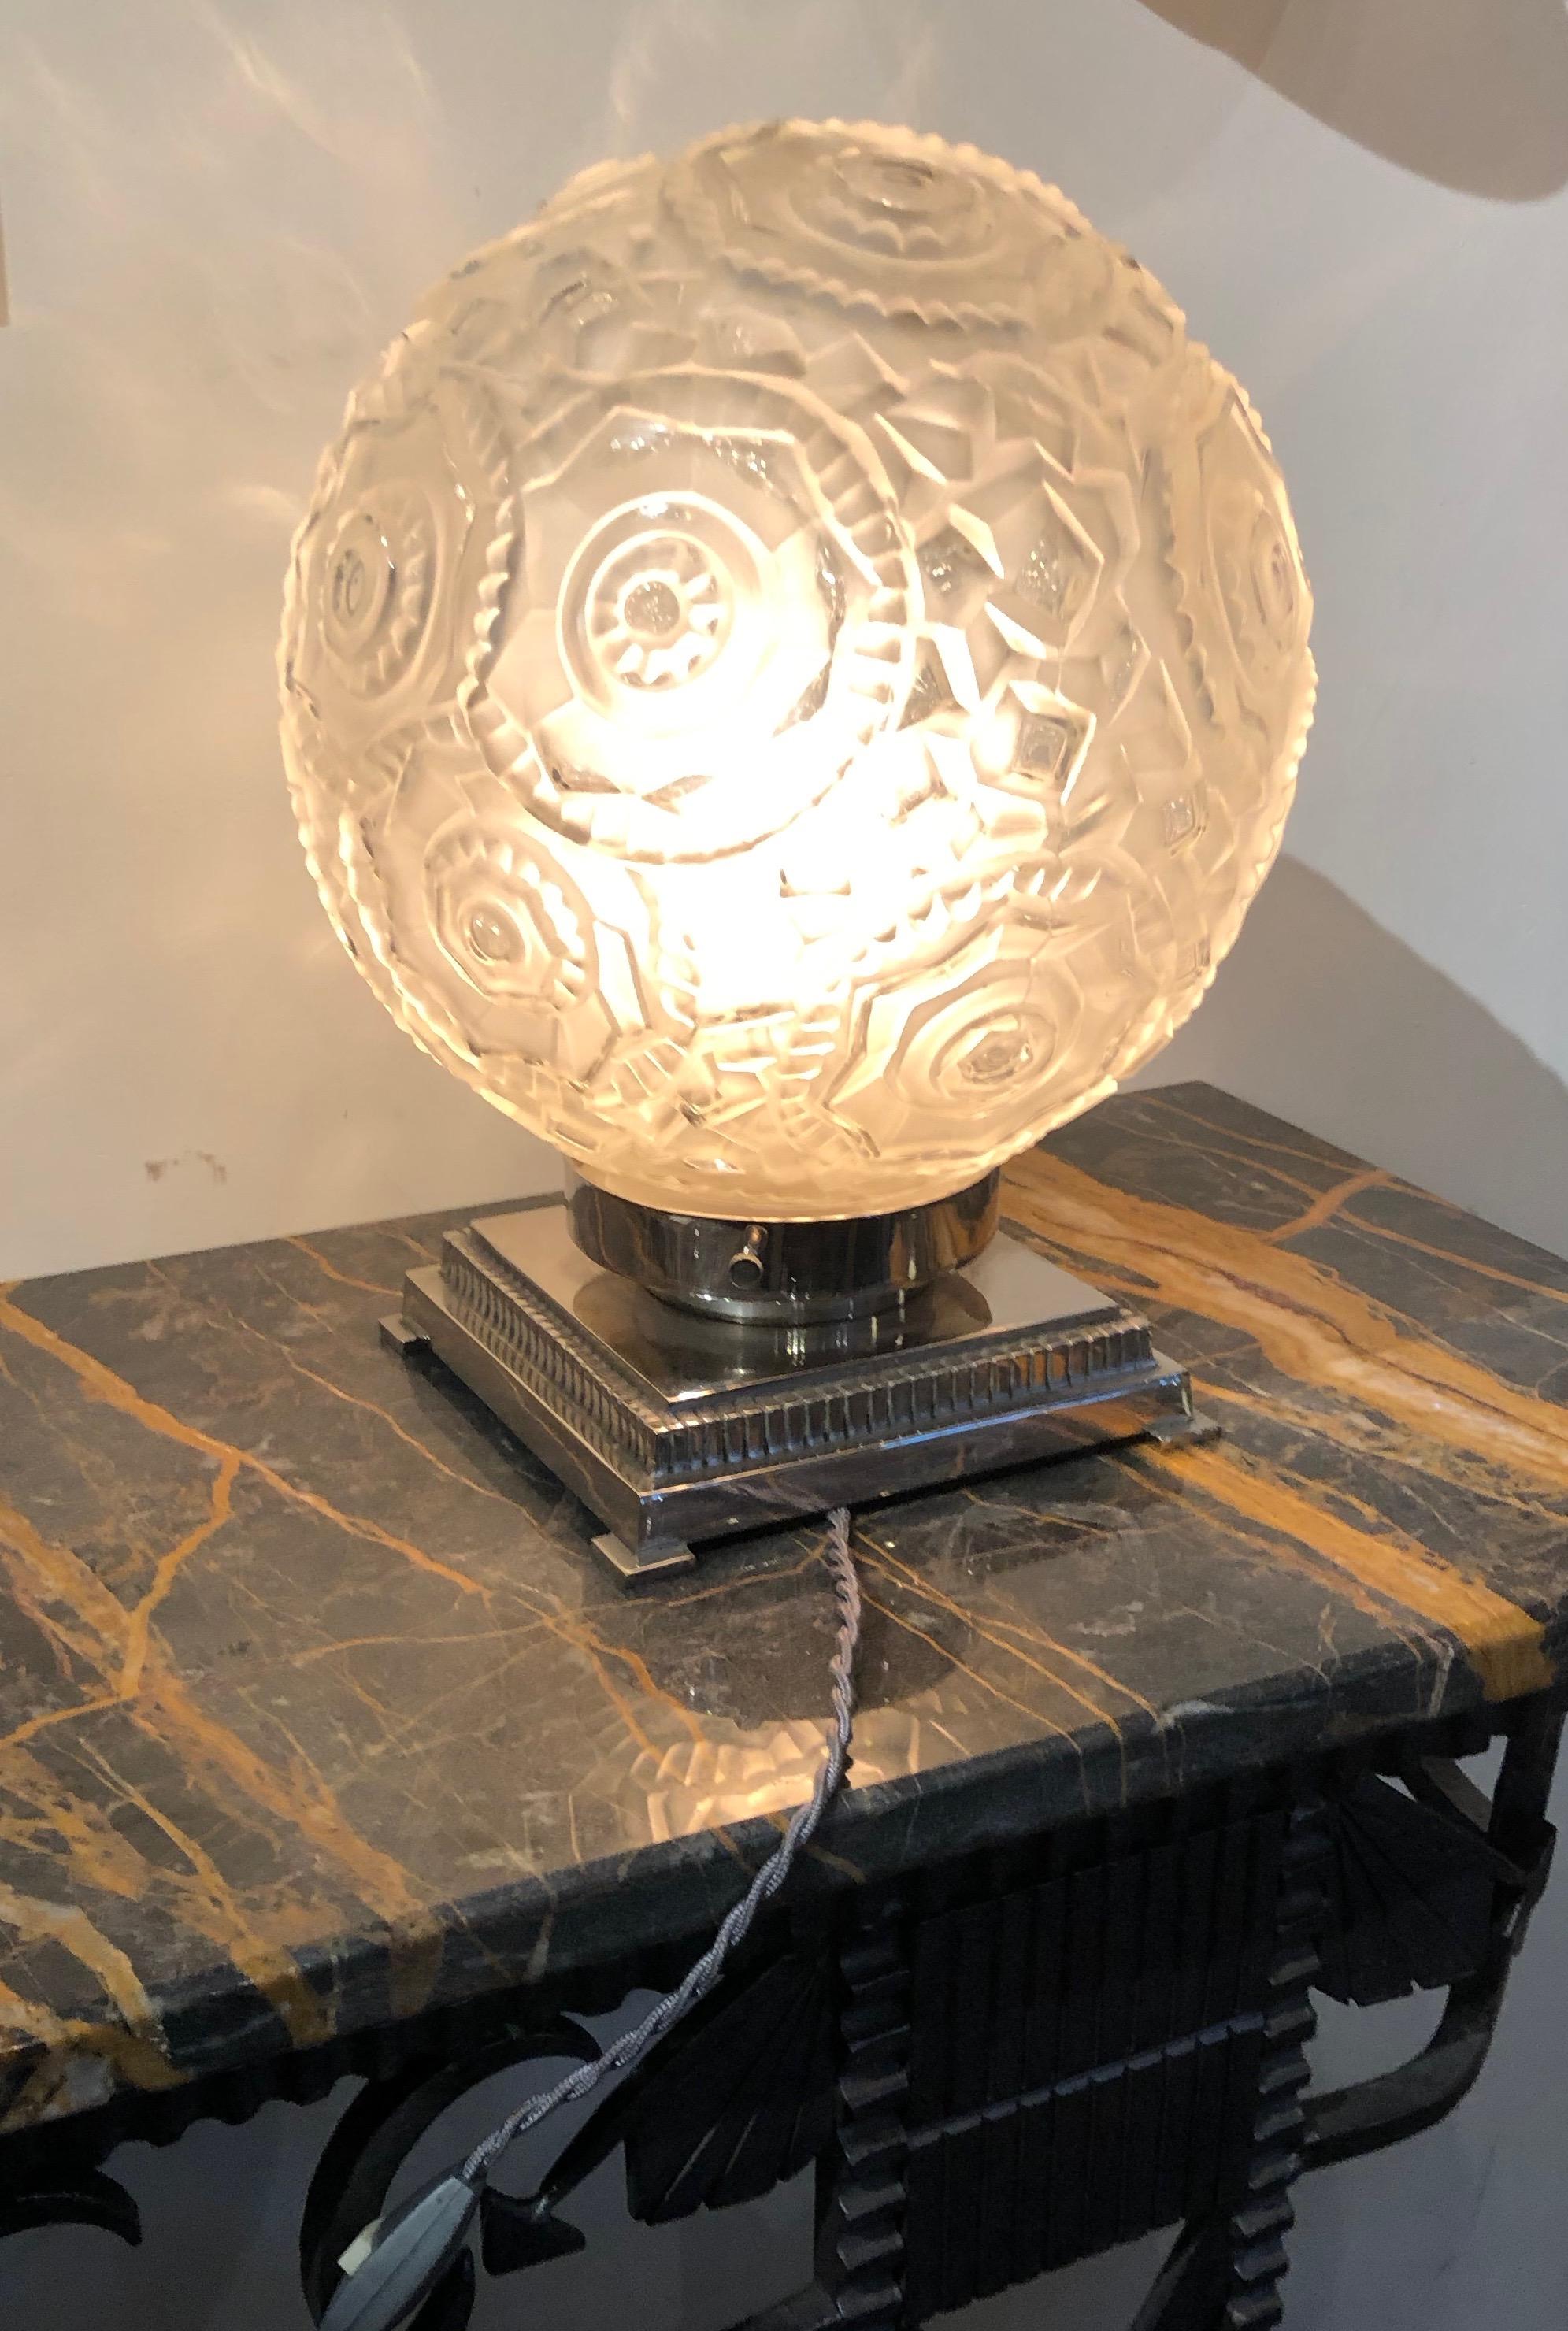 Sabino style Art Deco glass, rare, unusual, but unsigned. French Art Deco art glass on nickel metal base. Modern design of stylized circles on high relief, excellent quality nickel plated brass metal. New cloth wiring with original French bayonet